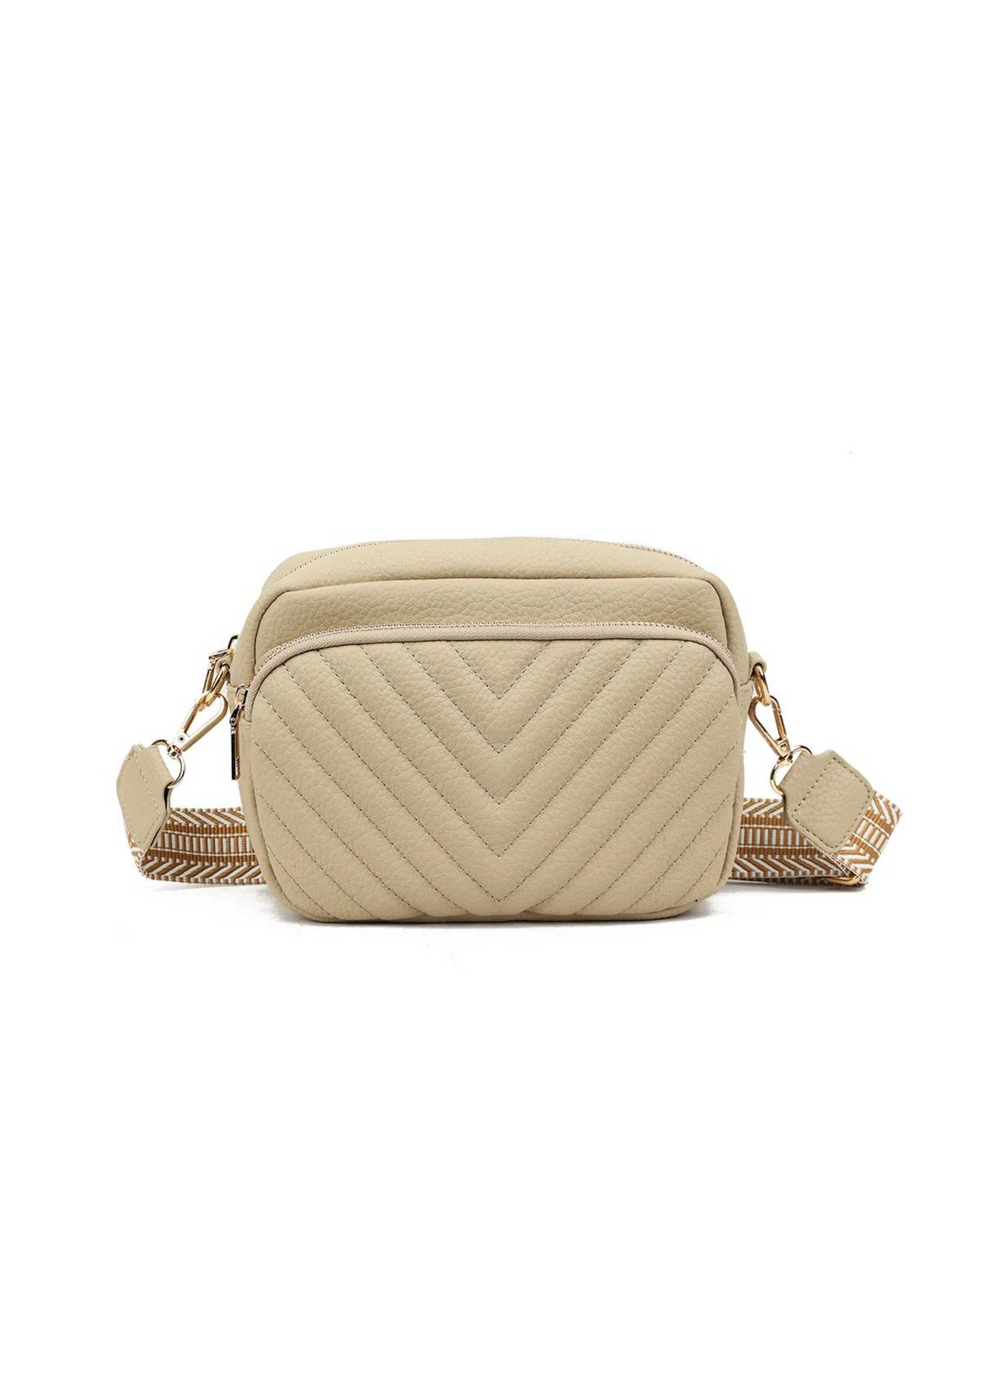 HALYCON CROSS BODY BAG WITH STITCHING DETAIL IN CAMEL FAUX LEATHER